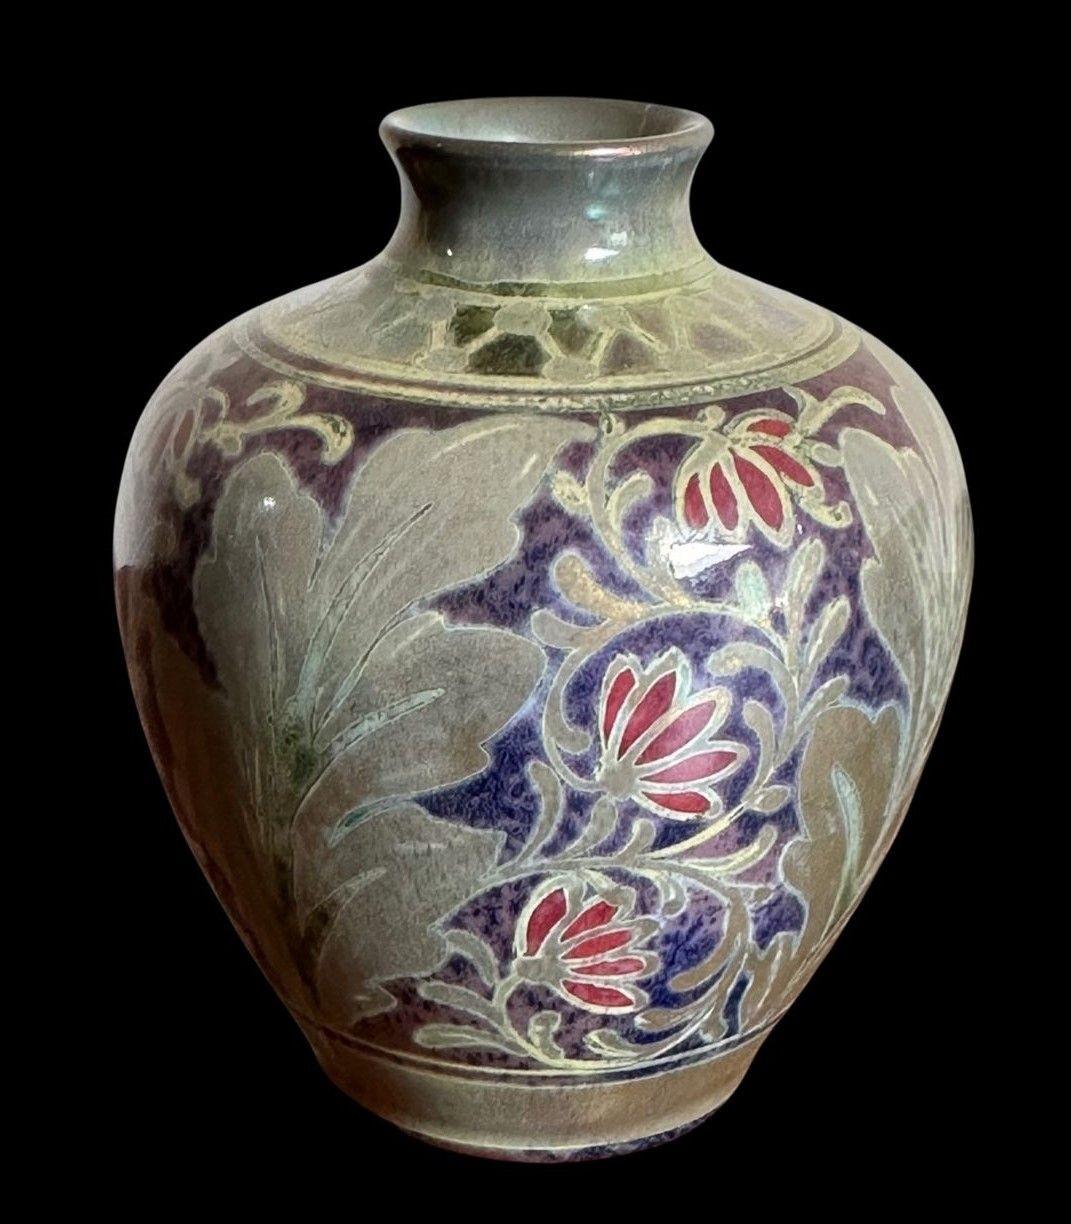 173
Pilkington's Royal Lancastrian Lustre vase decorated with stylised leaves and flowers by William Slater Mycock
Dated 1922
Measures: 10.5m high, 8cm wide
Ex AD antiques selling exhibition 2020.